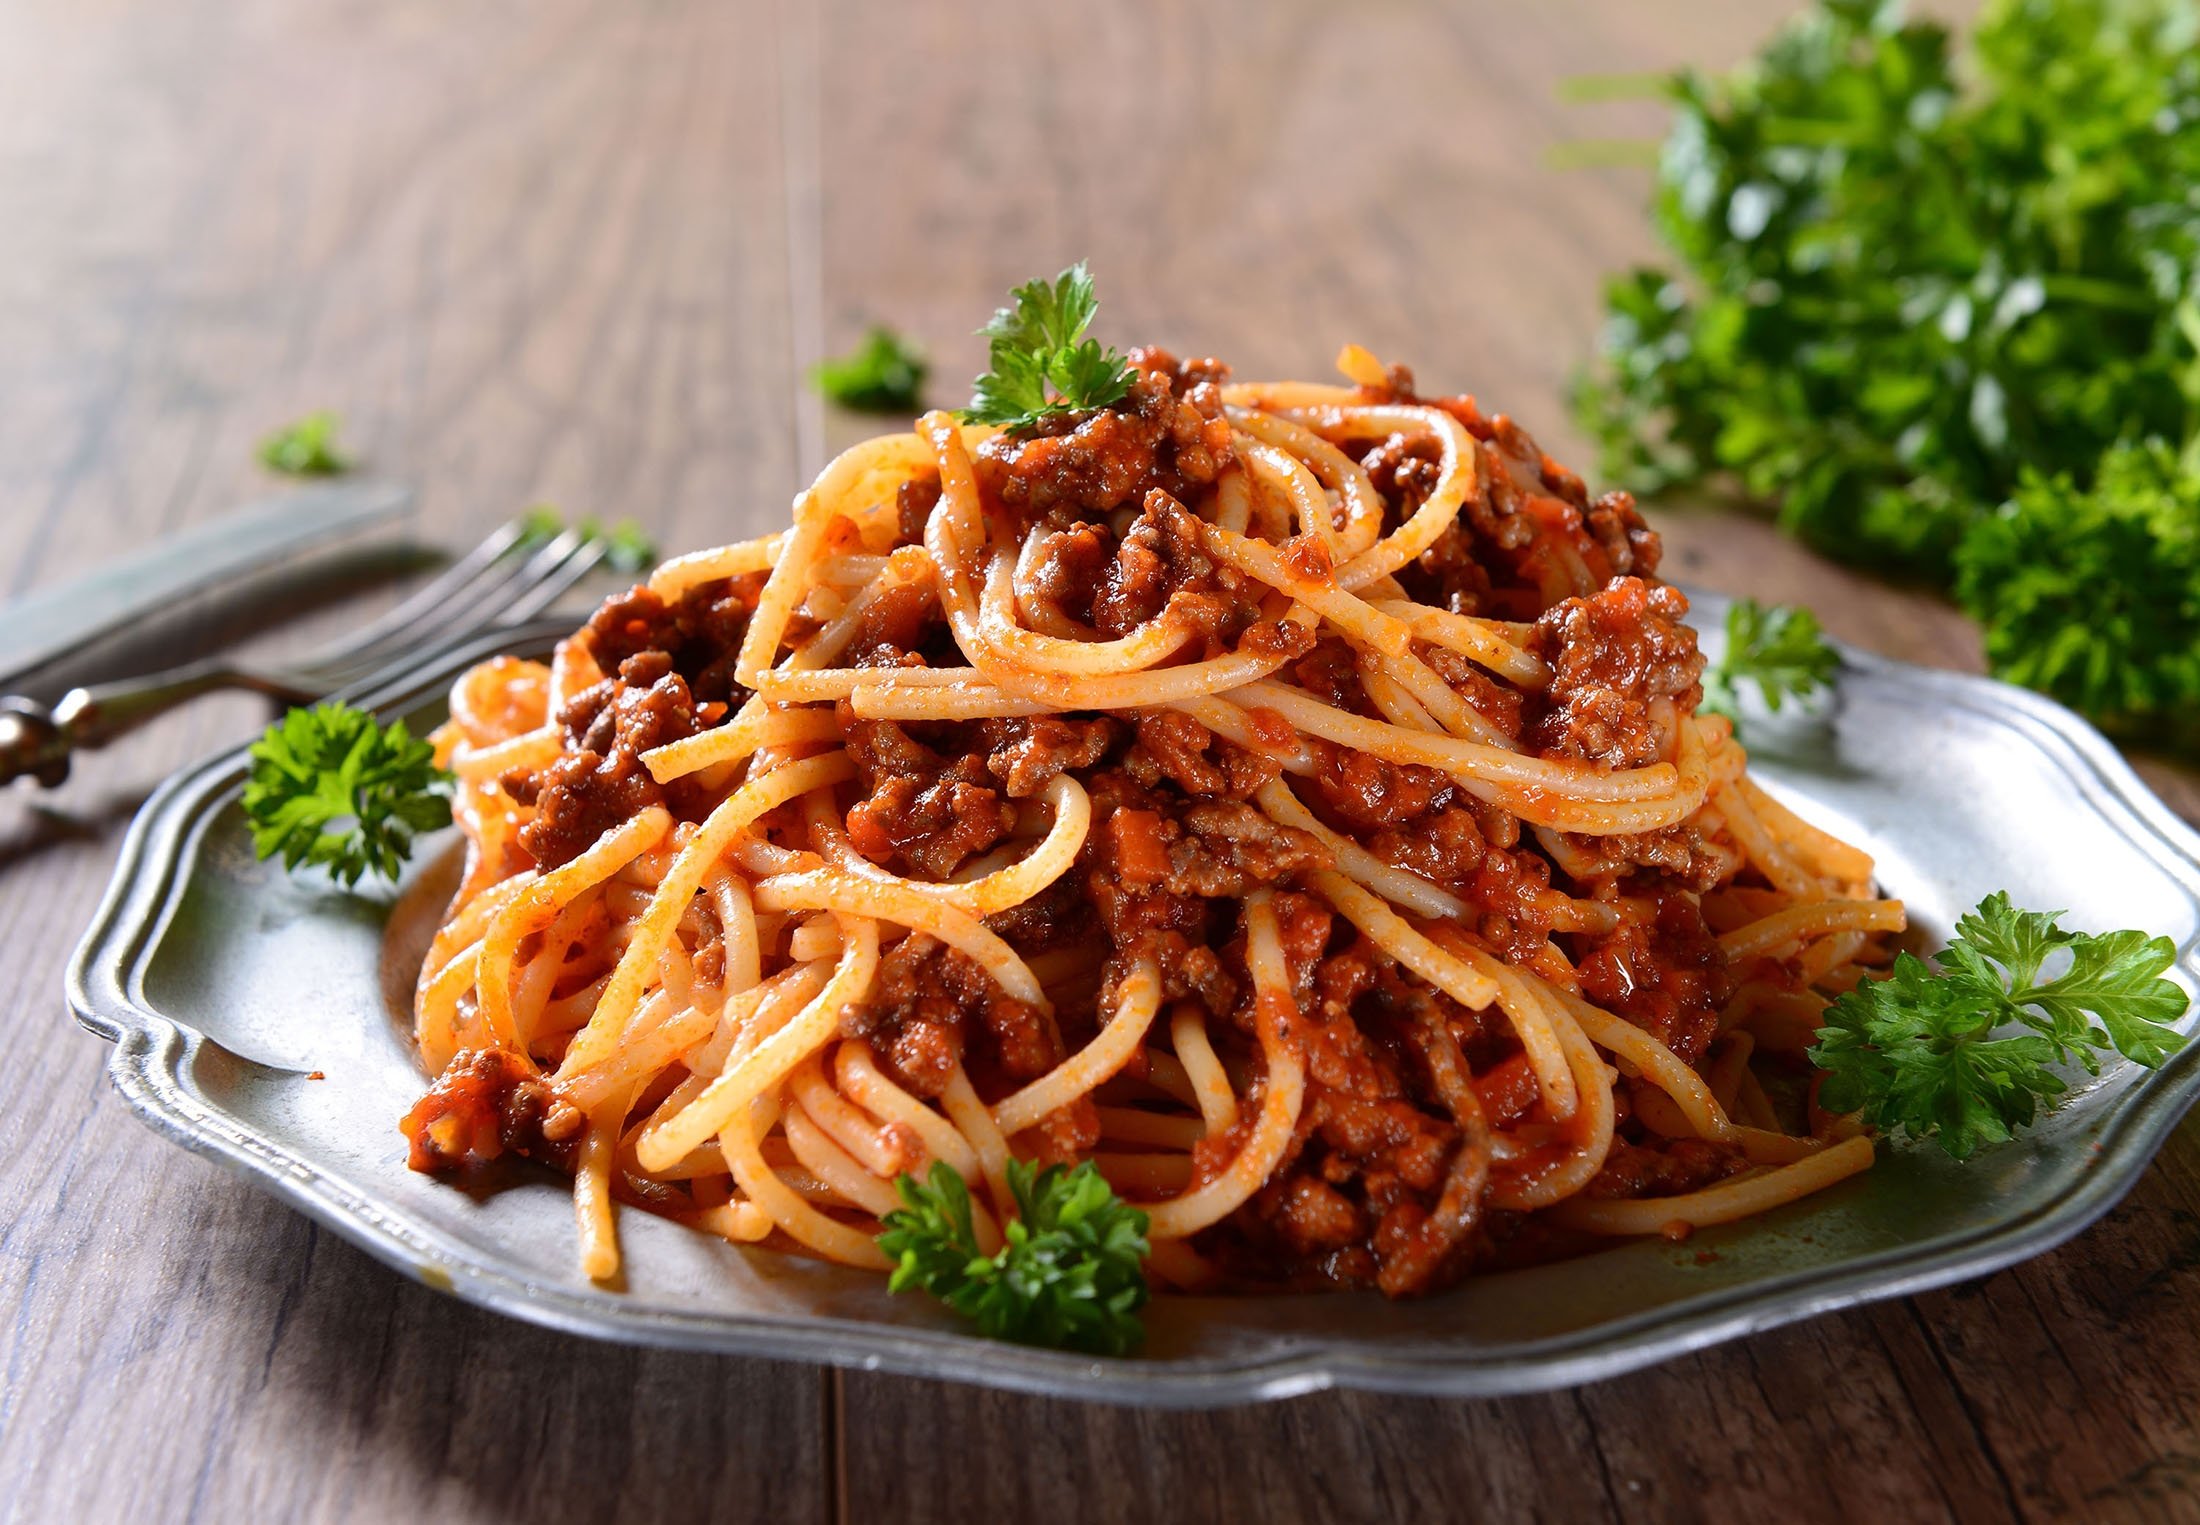 Spaghetti Bolognese is a quick and relatively clutter-free dinner dish.  (Photo from Shutterstock)